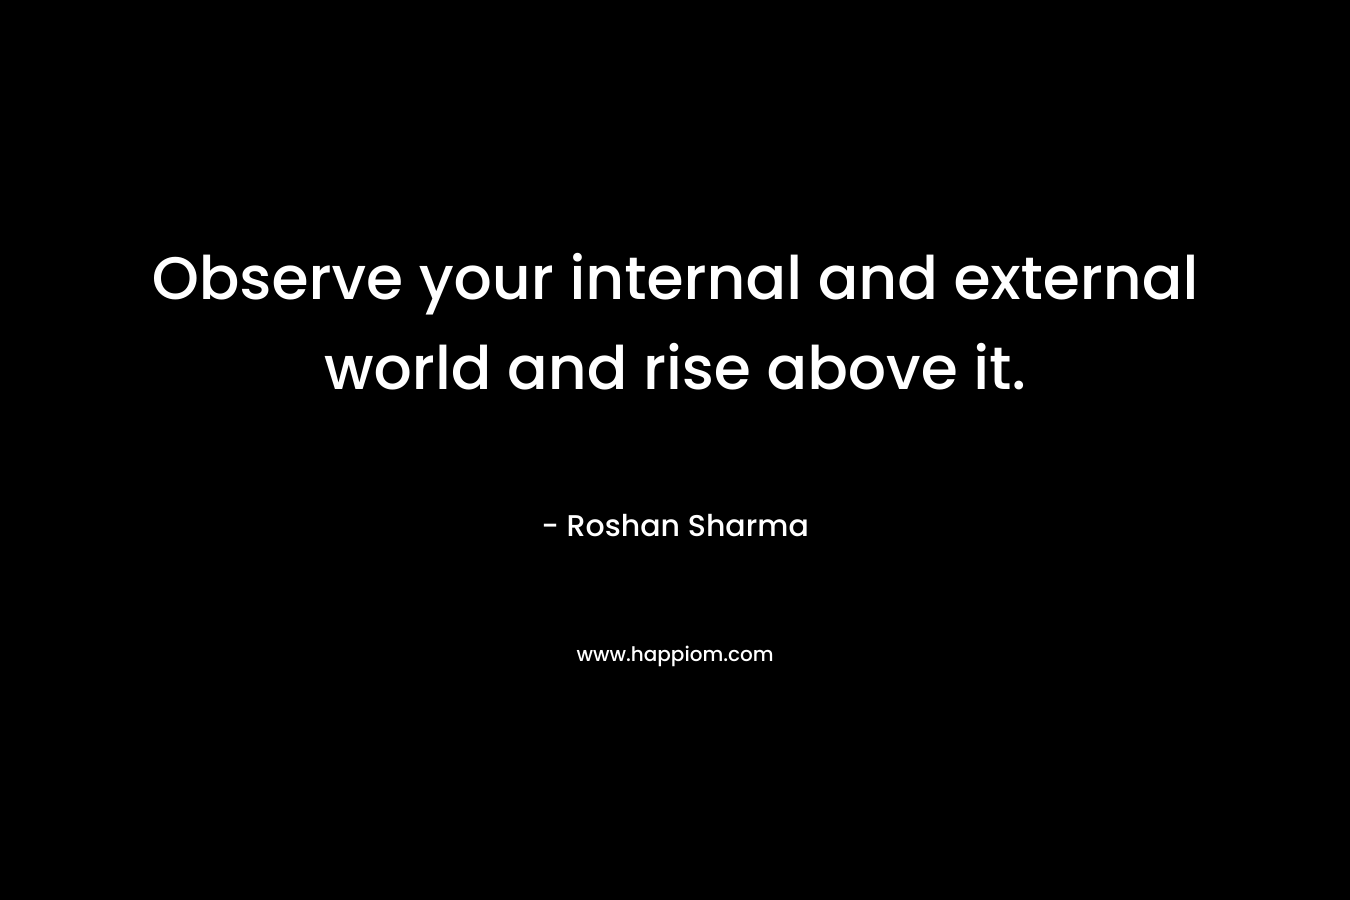 Observe your internal and external world and rise above it.